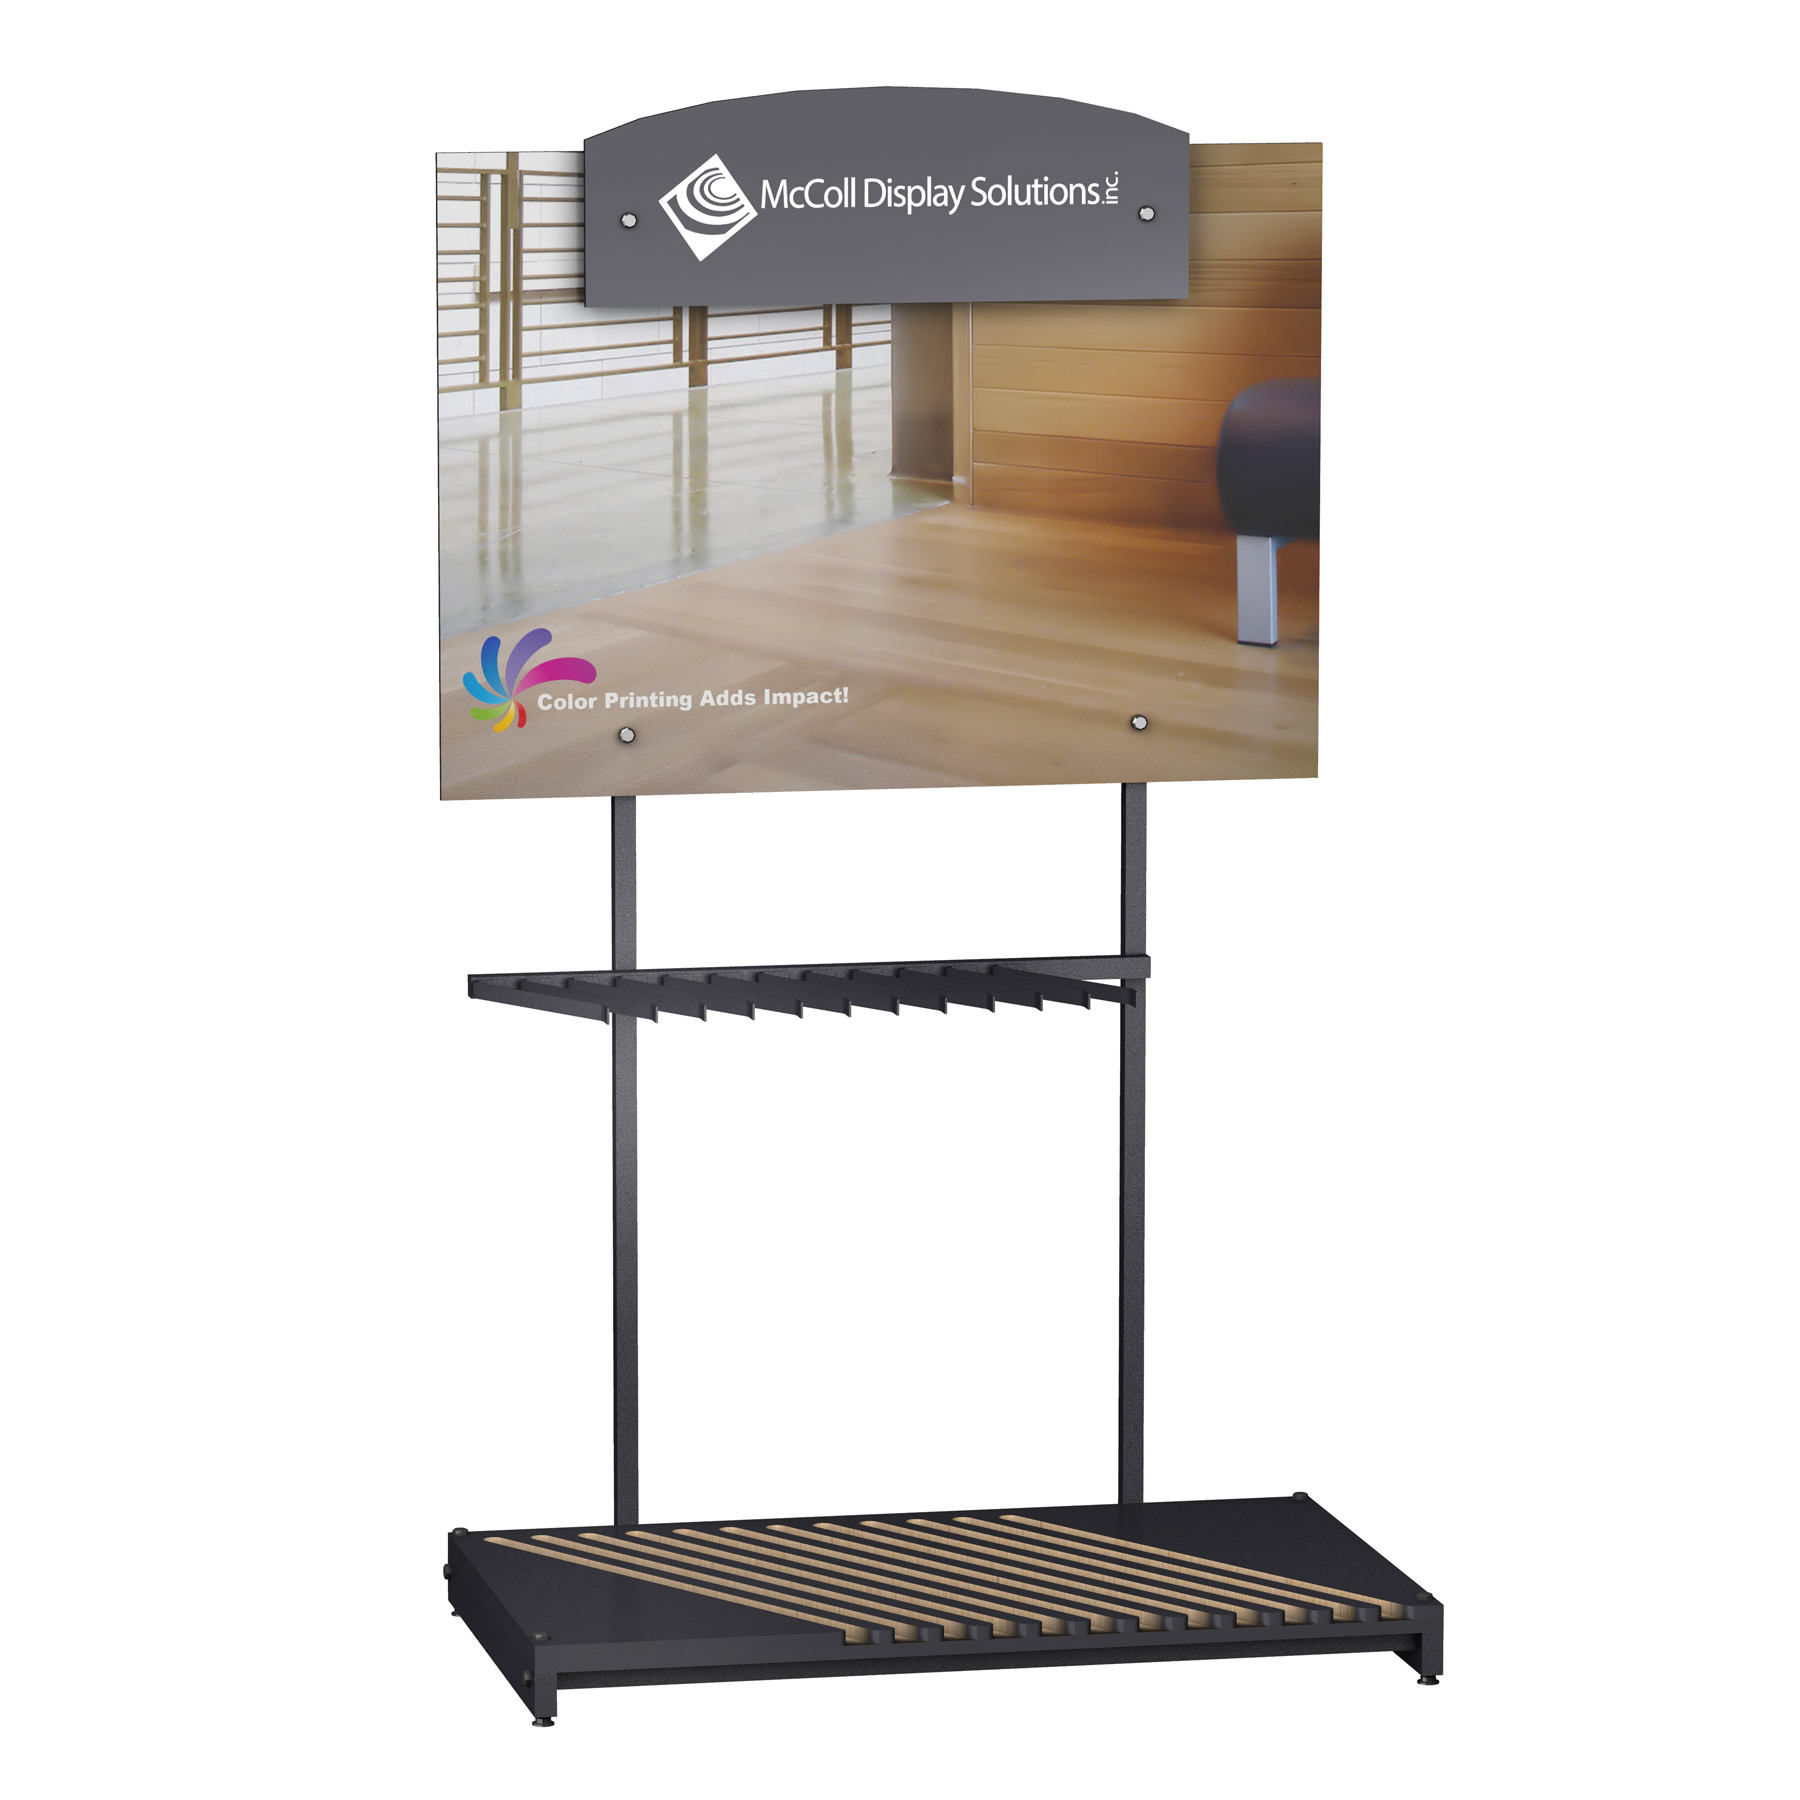 Hardwood Display CD101 Sturdy Frame Holds Wood and Laminate Planks Securely For Great Visibility with Option of Signage